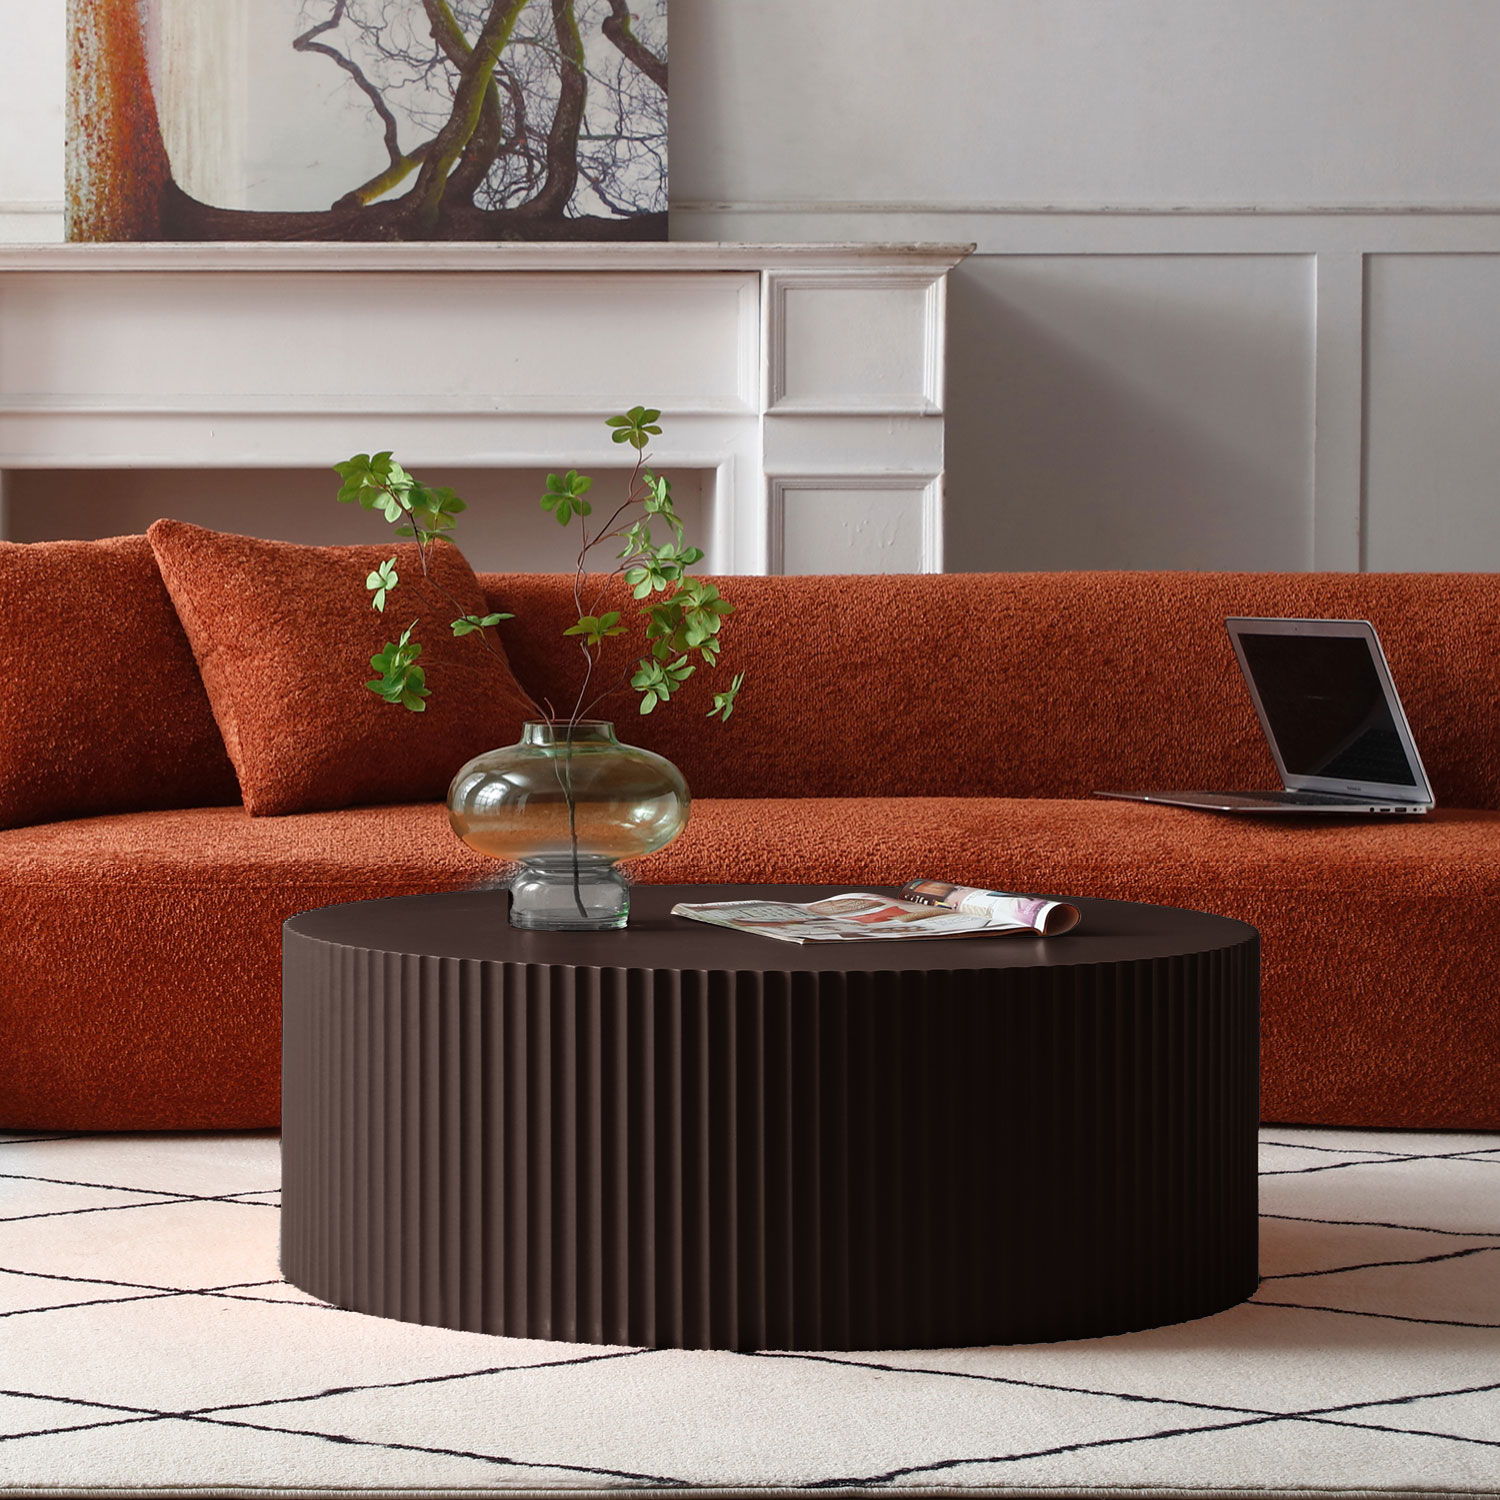 Artisanal Round Coffee Table With Handcrafted Relief And Stunning Painting Finish, Brown